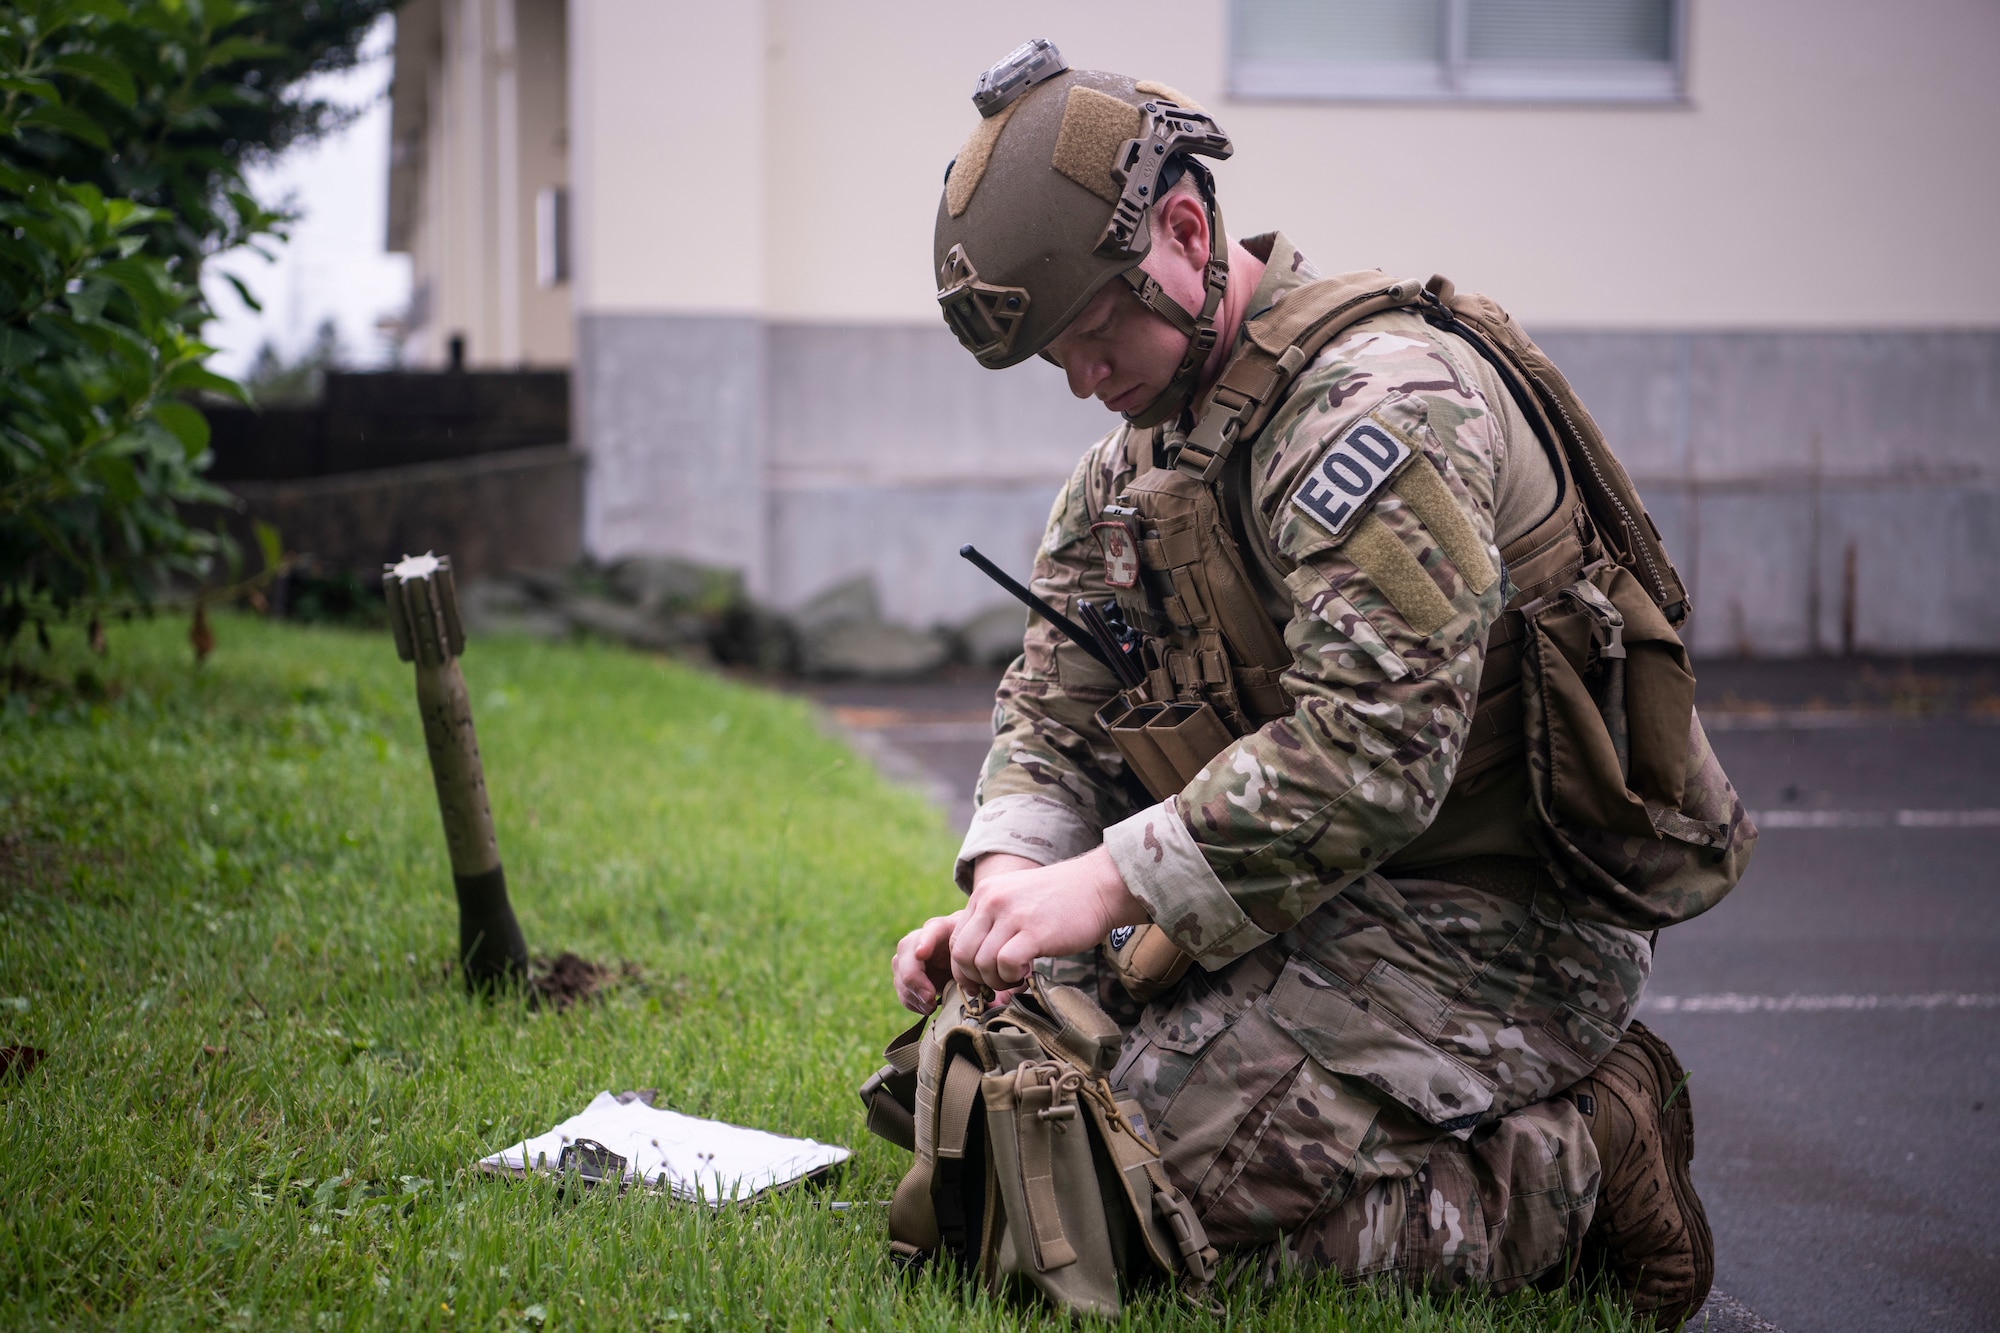 A U.S. Air Force member kneels down next to equipment on the ground.